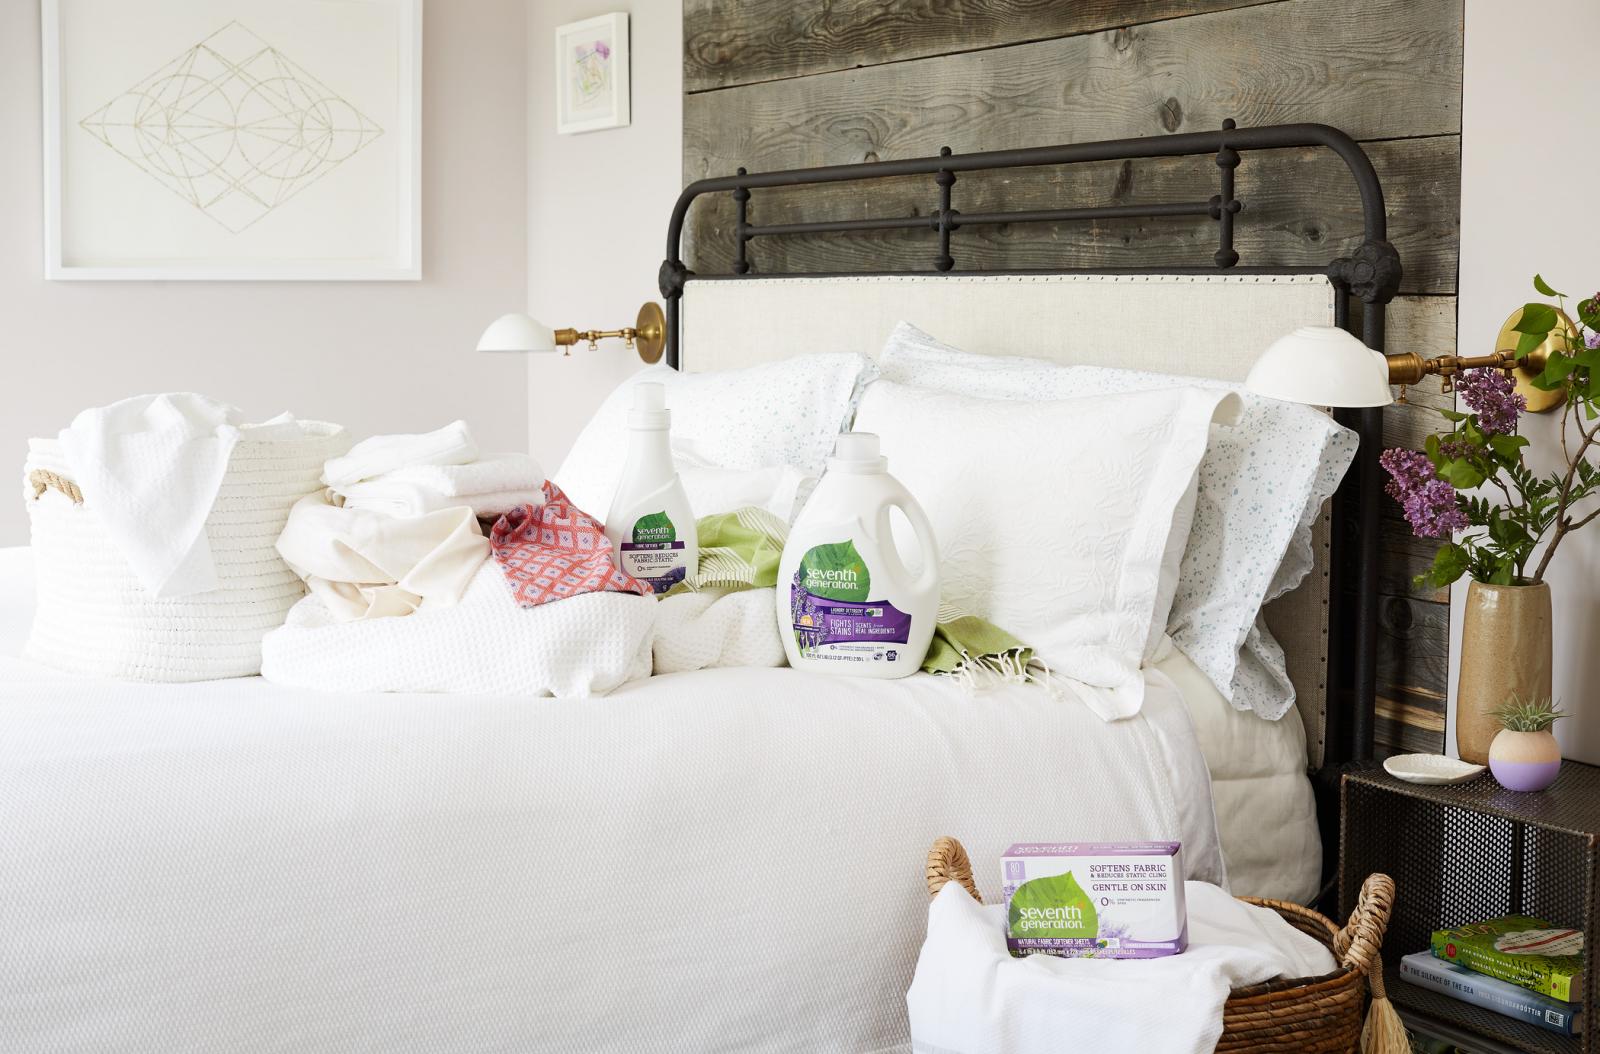 Lavender Laundry, Softener, and Sheets on Bed